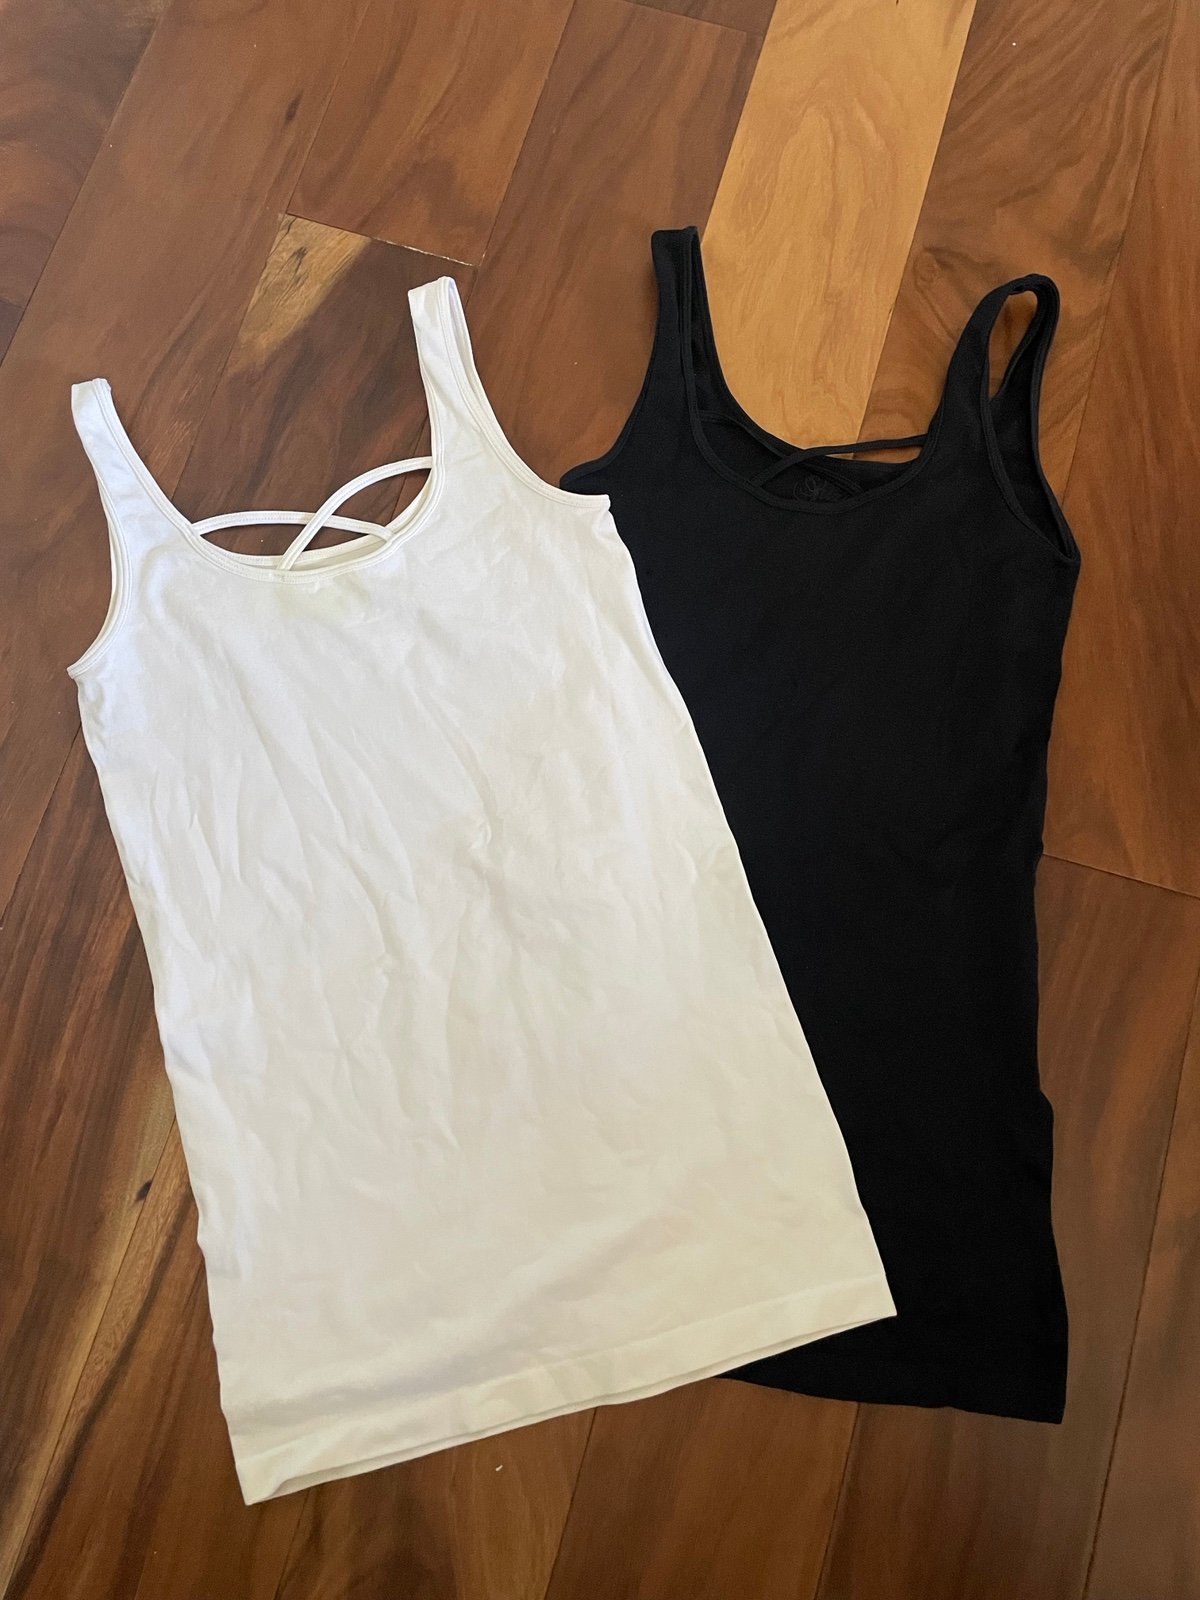 Latest  Black and White Tanks l4B95Yh8n online store